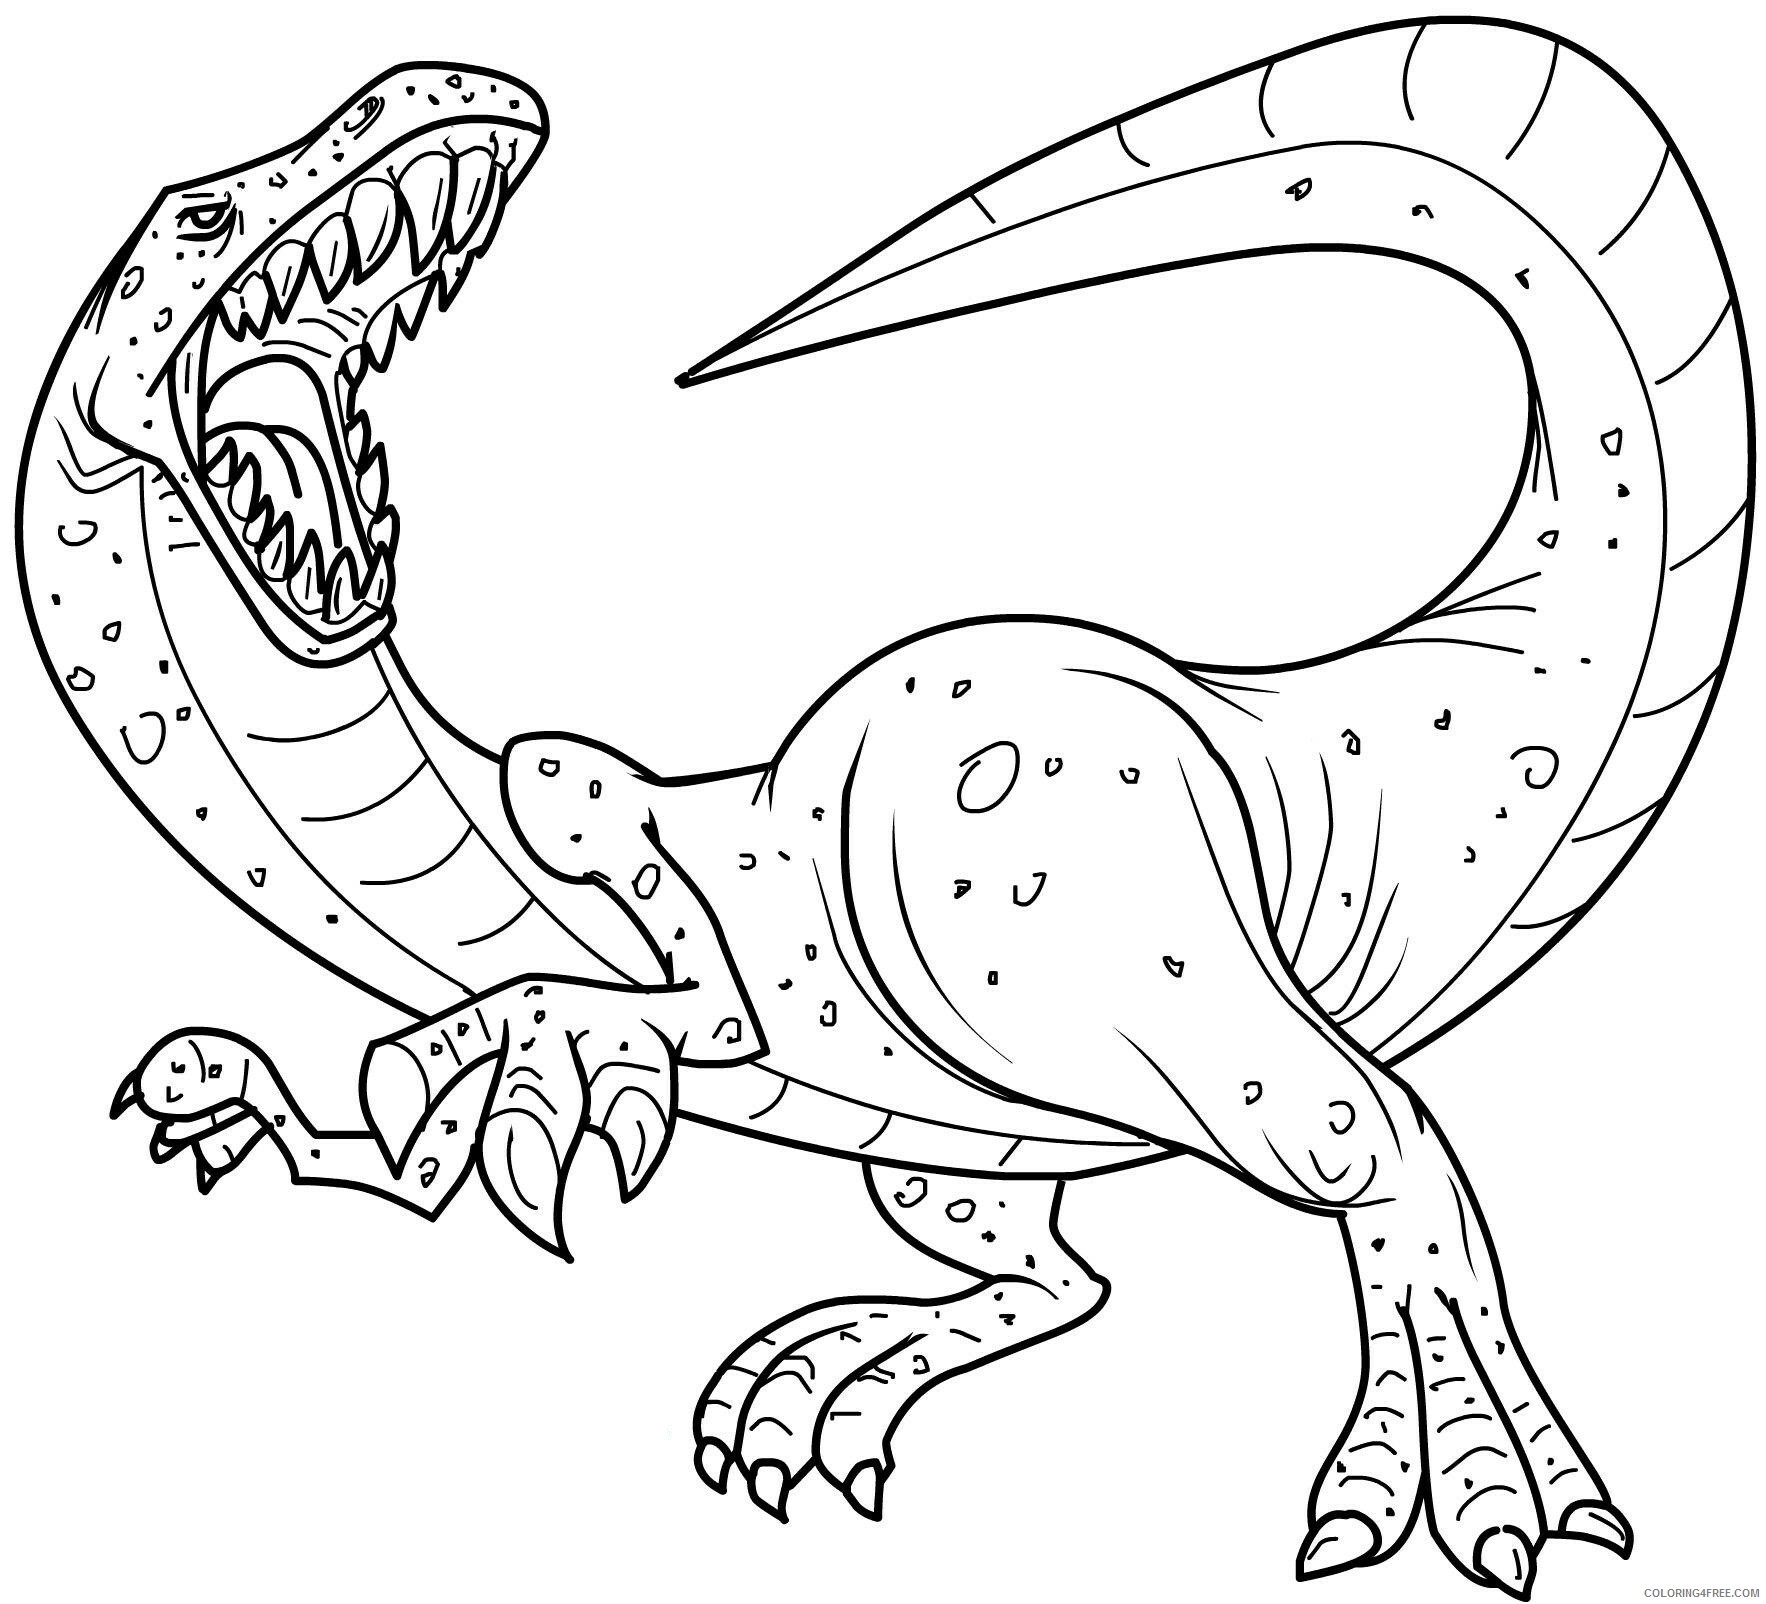 Dinosaurs Coloring Pages for boys Dinosaurs Frees Printable 2020 0300 Coloring4free